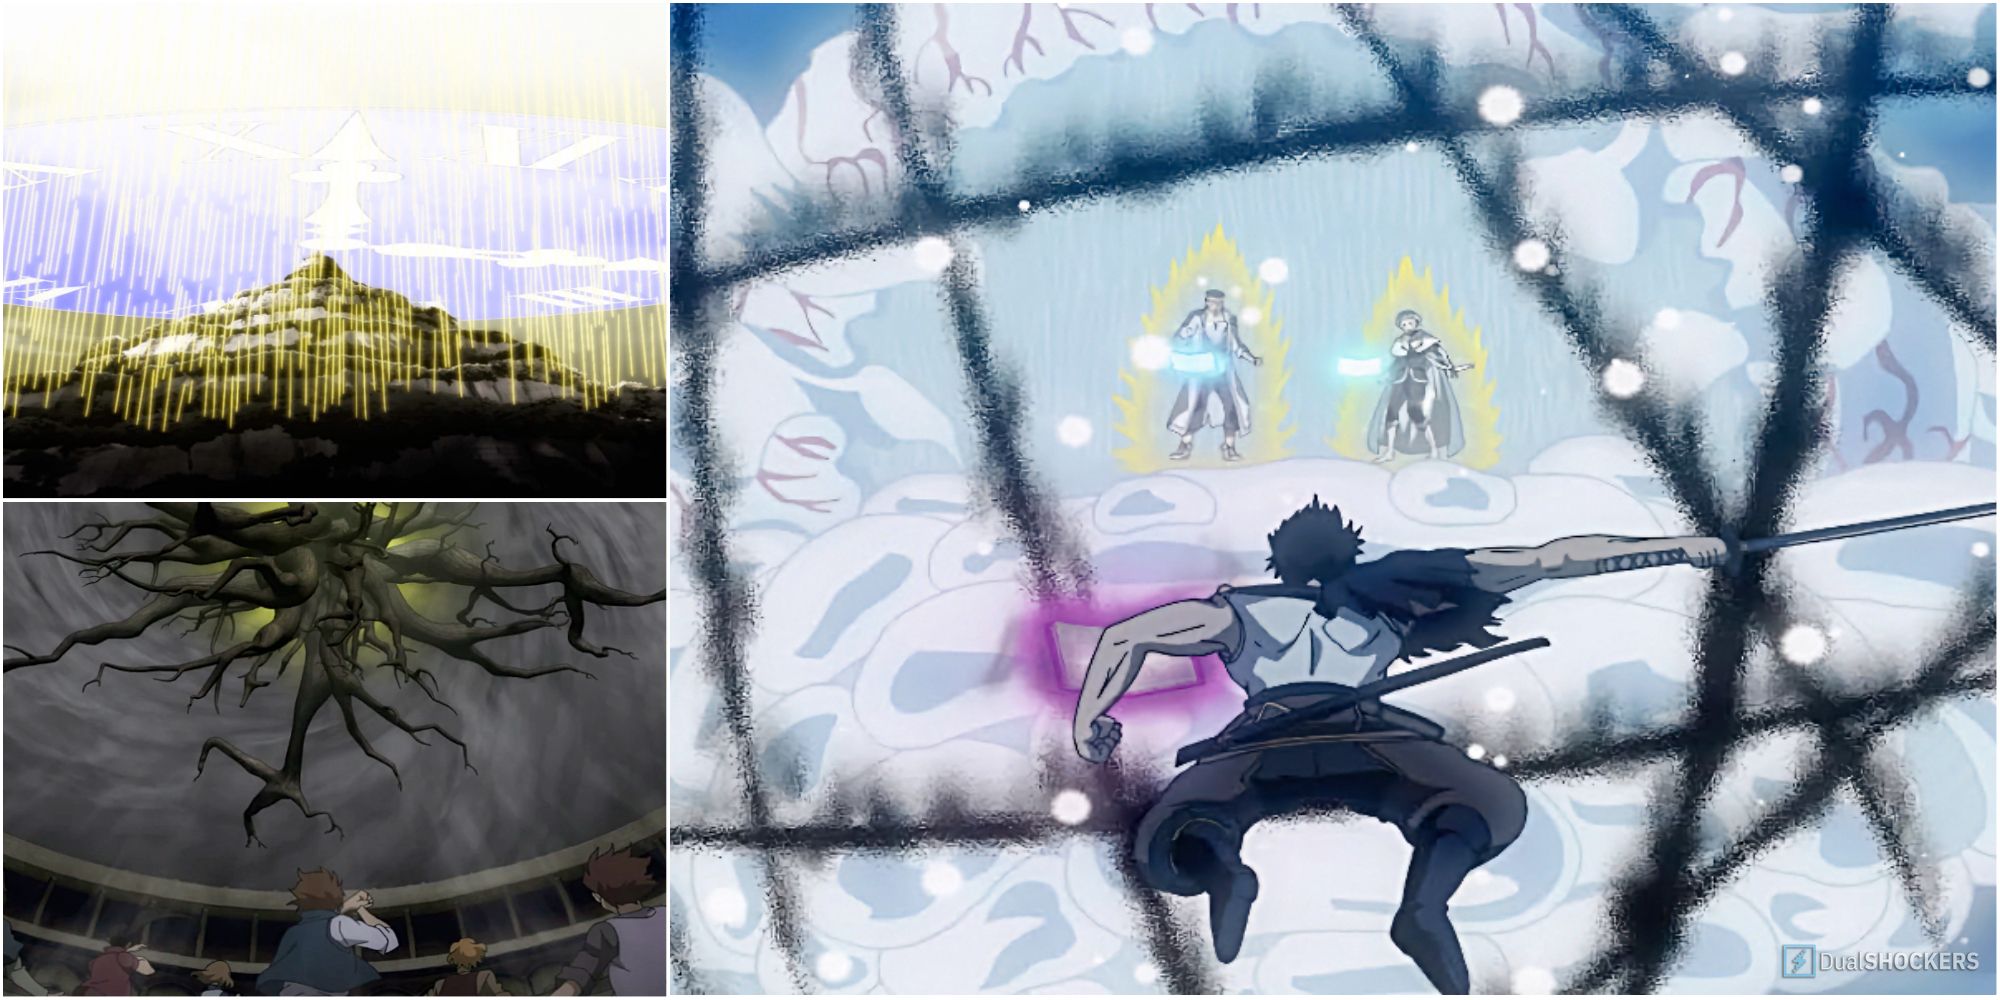 All Black Clover Openings, Ranked